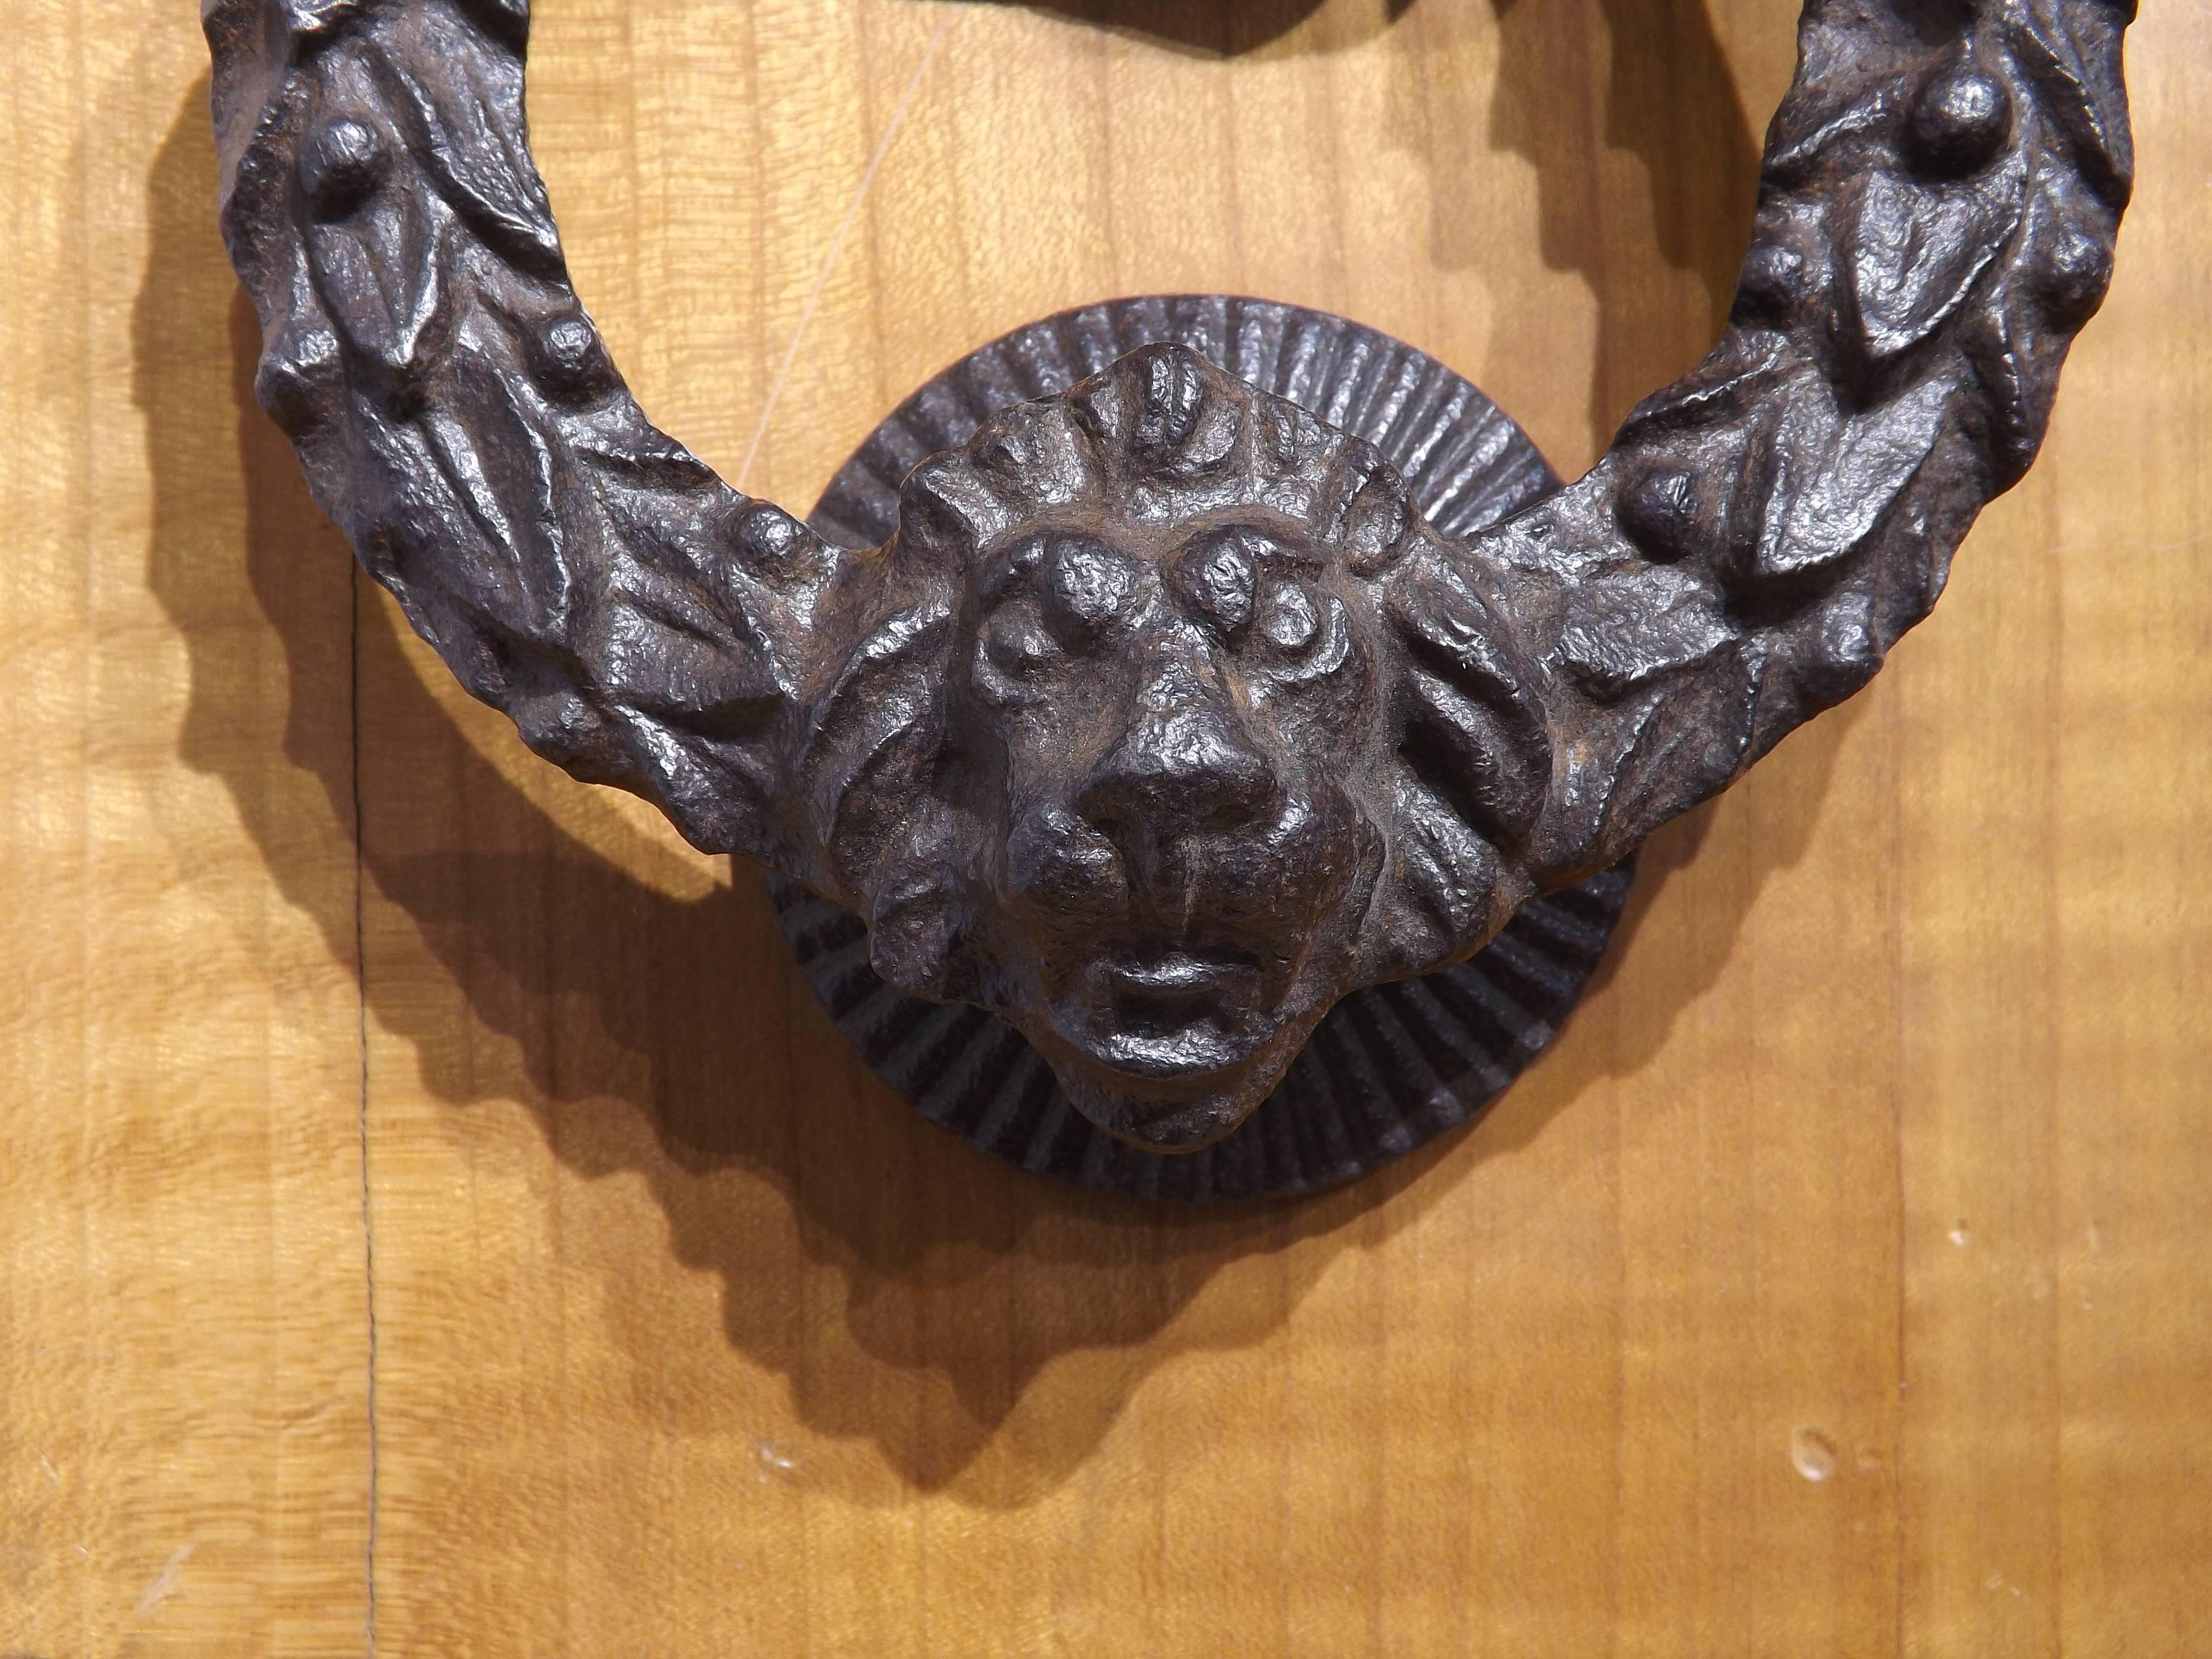 A handsome Victorian Era door knocker of a clenched fist holding a wreath with a lion's head. Complete with matching hammer plate, mounted on a wooden board for display. Easily adapted for use on a modern door. Knocker dimensions are 6 inches tall,